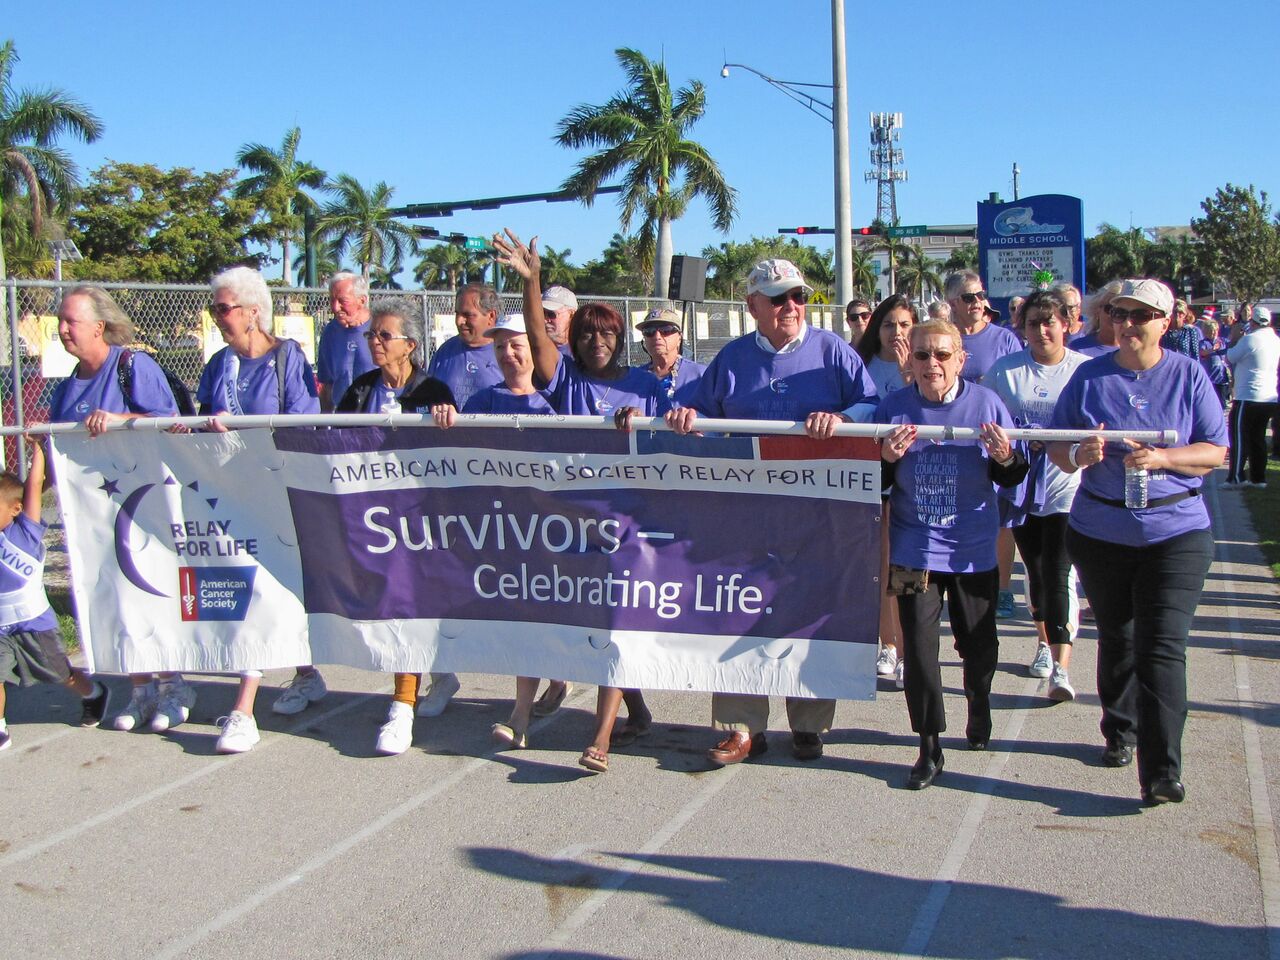 People participating in Relay for Life while holding a American Cancer Society banner